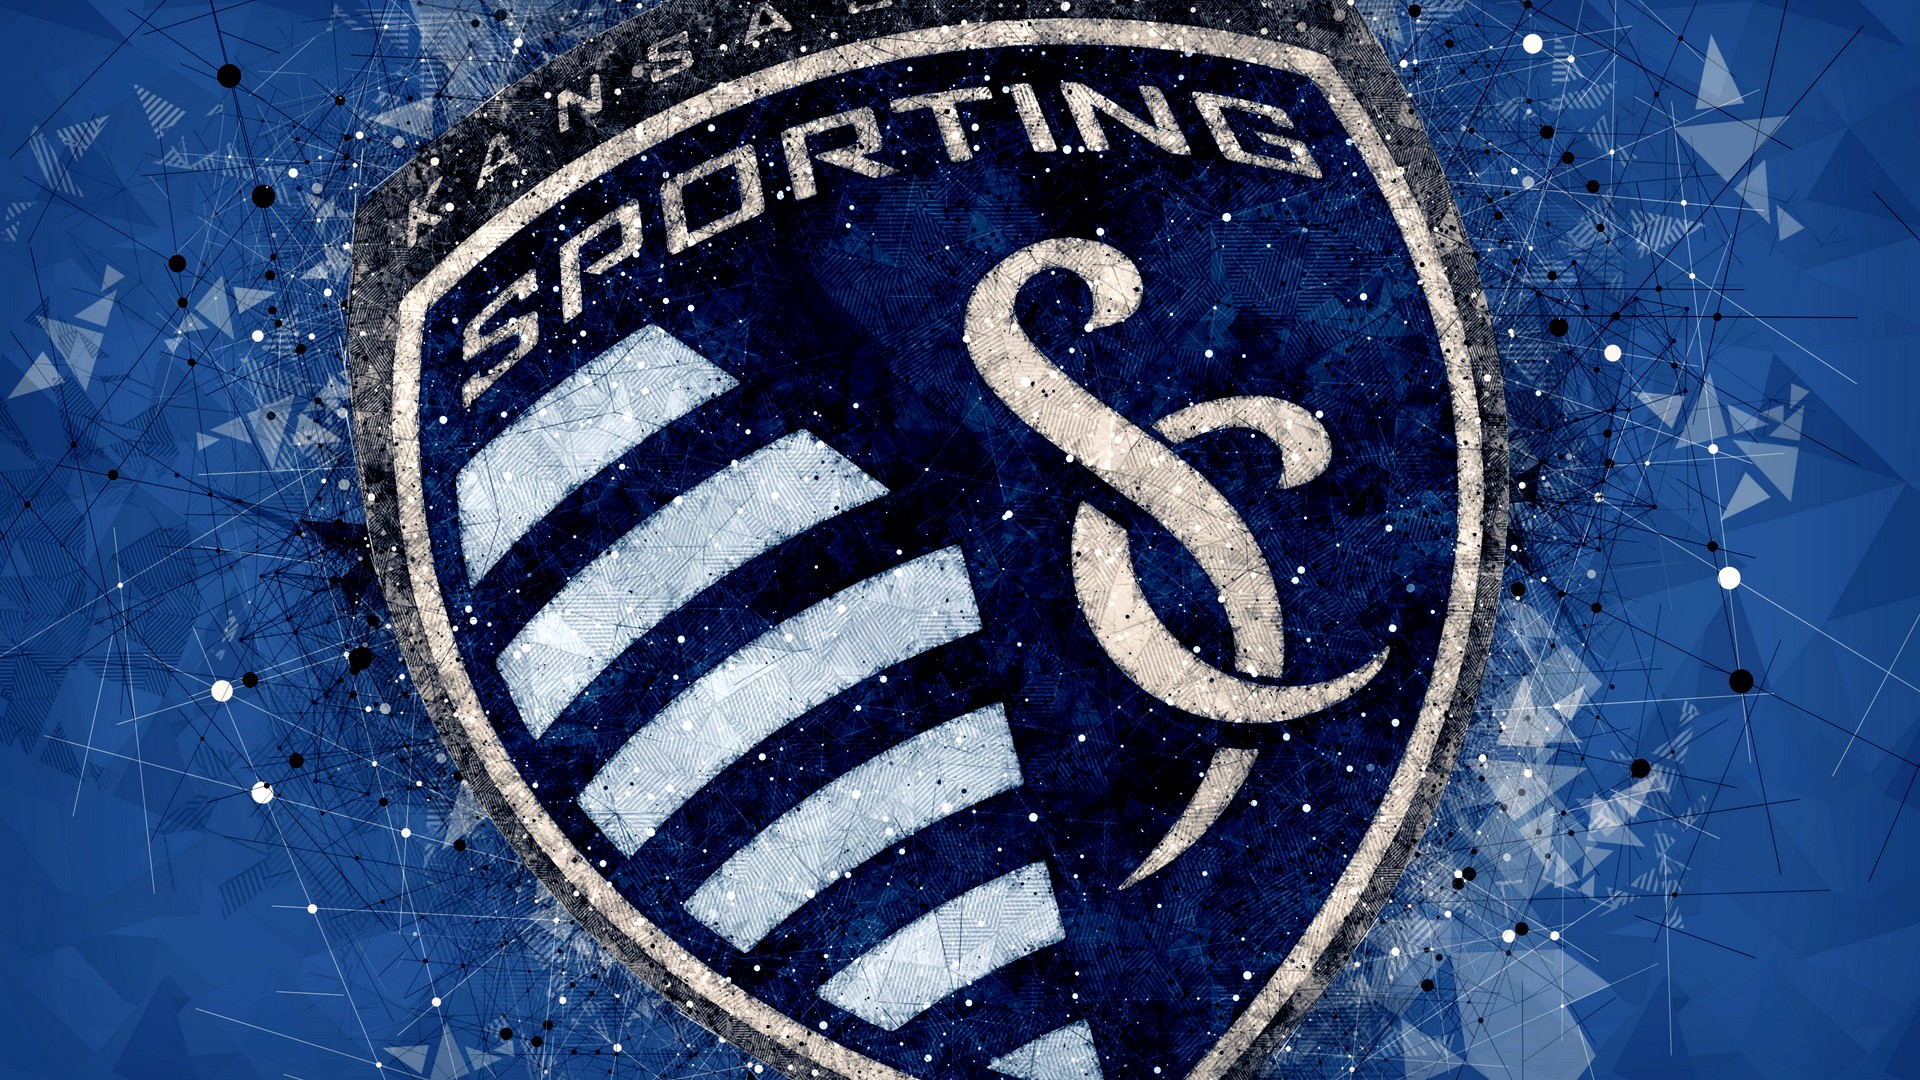 Sporting Kansas City HD Wallpapers With high-resolution 1920X1080 pixel. You can use this wallpaper for your Desktop Computers, Mac Screensavers, Windows Backgrounds, iPhone Wallpapers, Tablet or Android Lock screen and another Mobile device